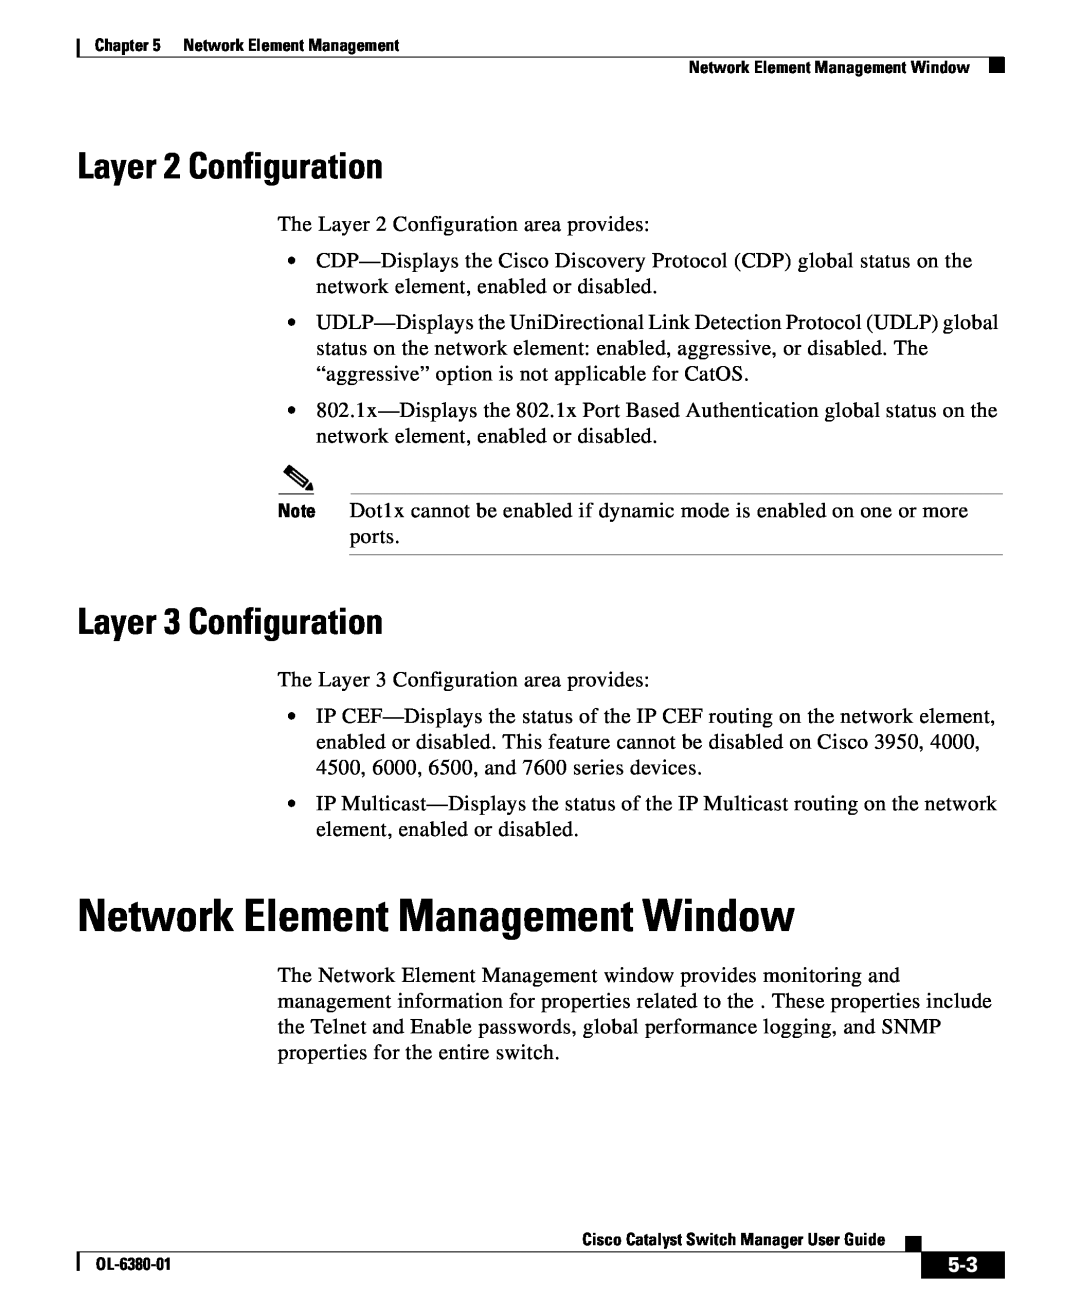 Cisco Systems OL-6380-01 manual Network Element Management Window, Layer 2 Configuration, Layer 3 Configuration 